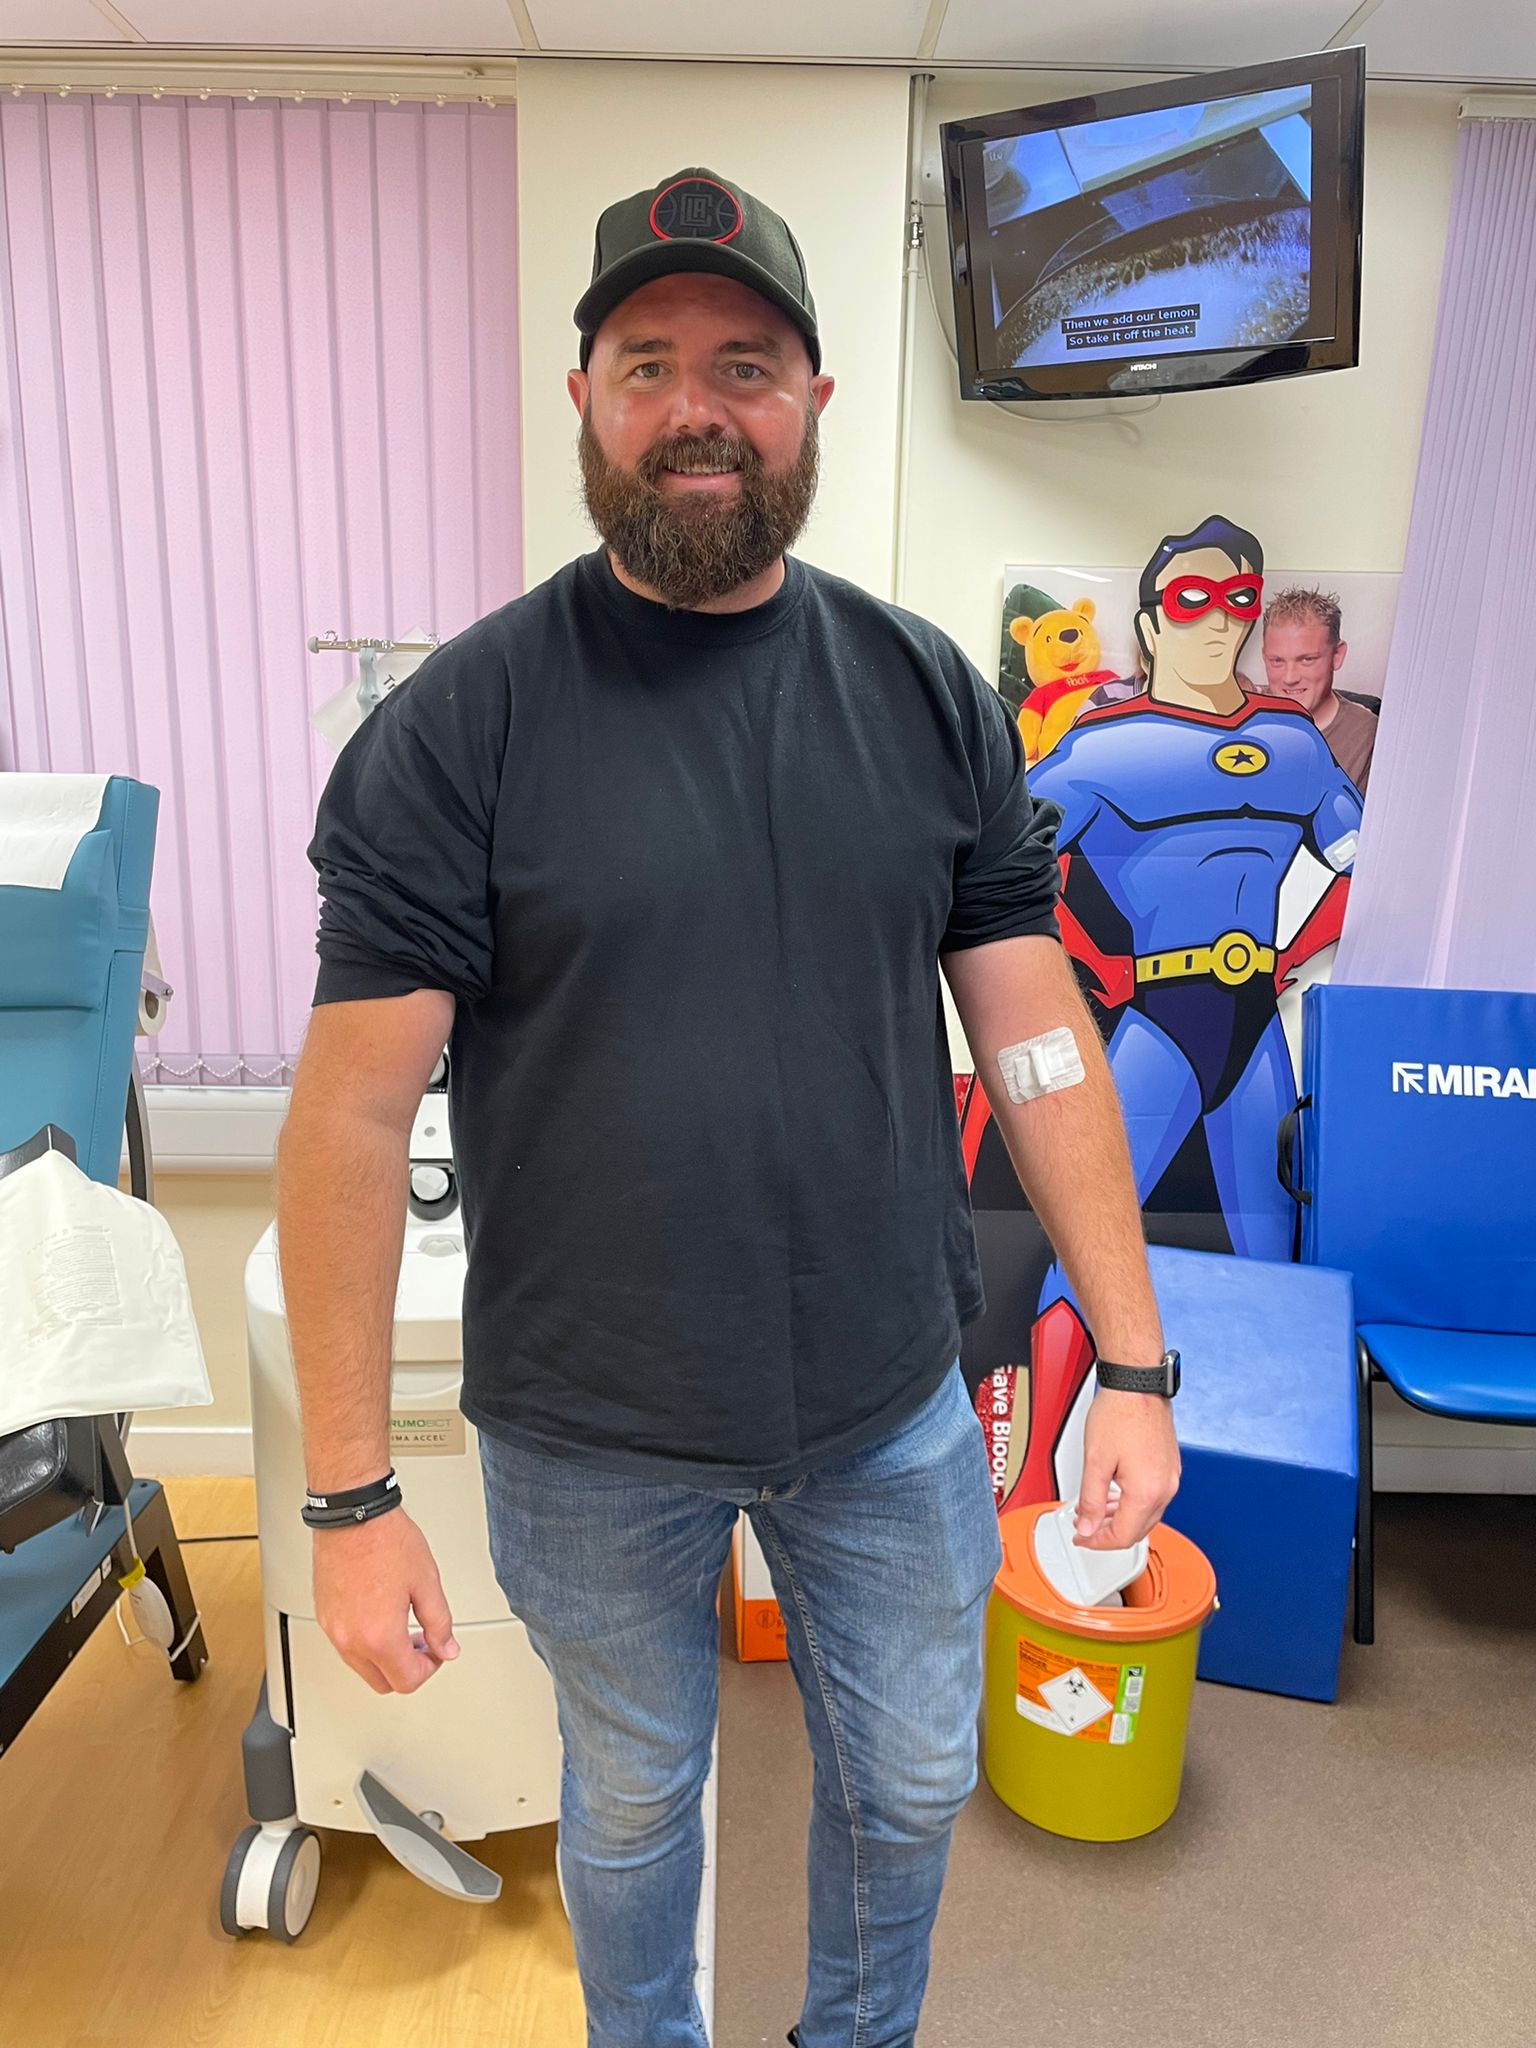 Carl Etherington, from Castleford, West Yorkshire, gave blood during Saturday's campaign and said the atmosphere at the donor centre was "brilliant".